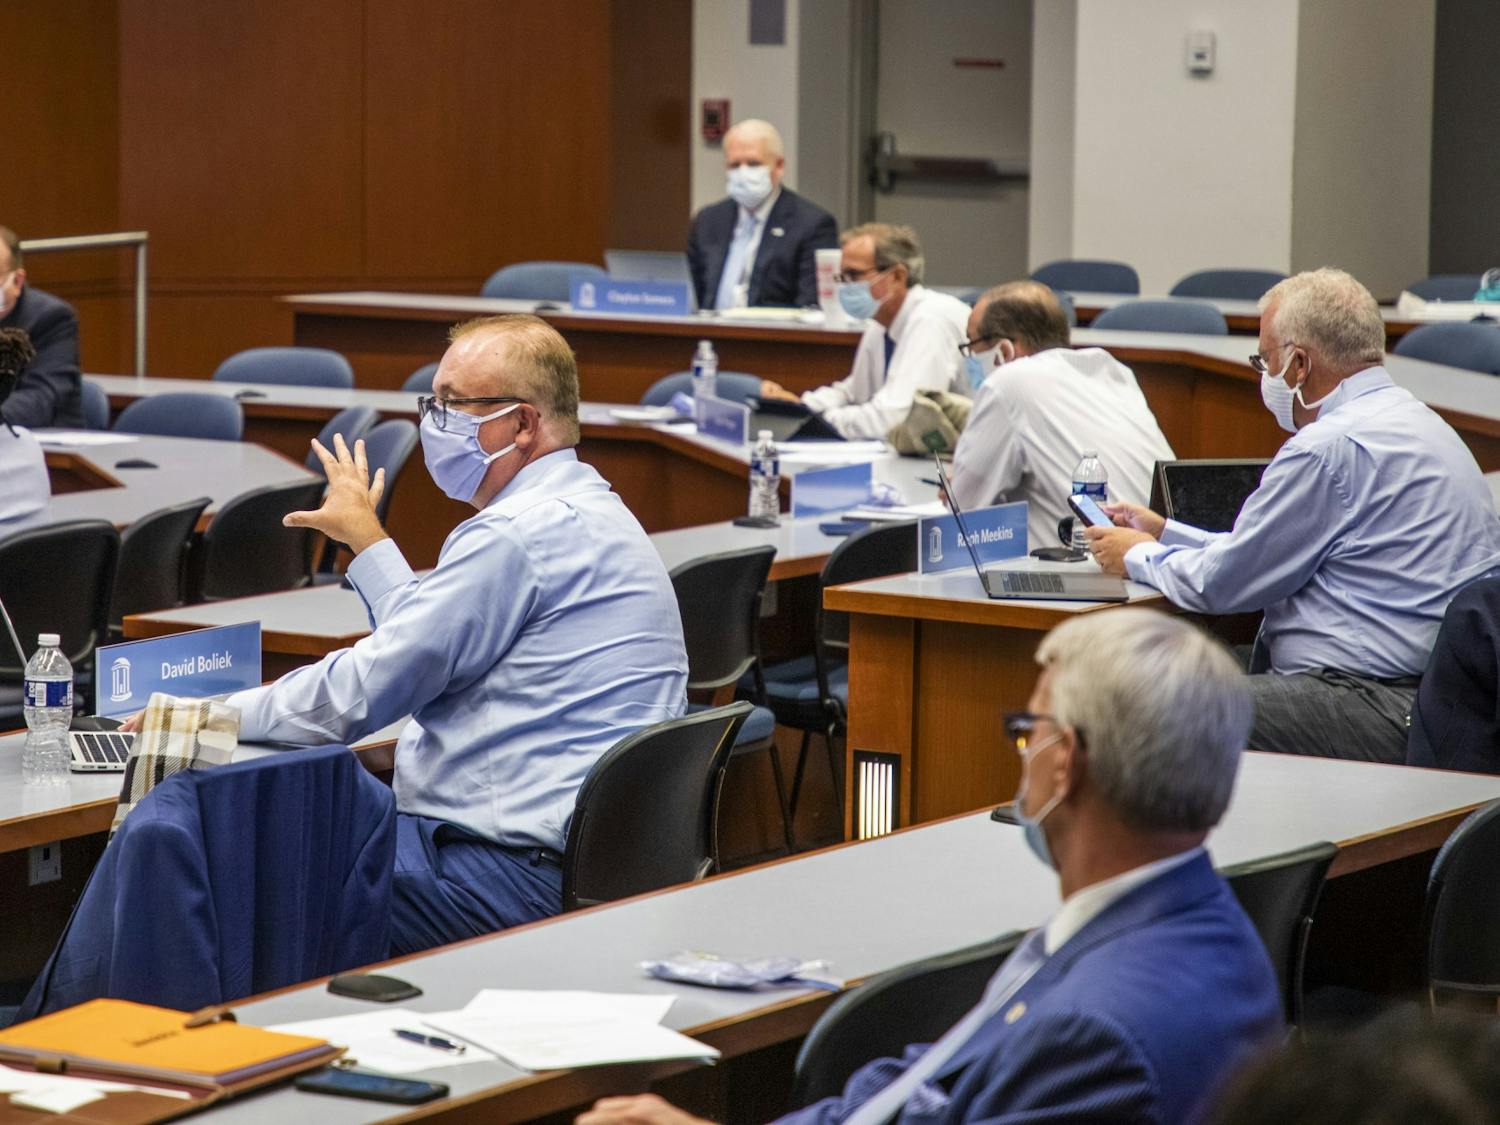 UNC Board of Trustees member David Boliek discusses amendments to a new policy for renaming campus buildings during a UNC Board of Trustees meeting on Thursday, July 16, 2020, in Chapel Hill, N.C.
Photo courtesy of Casey Toth of the News &amp; Observer.&nbsp;